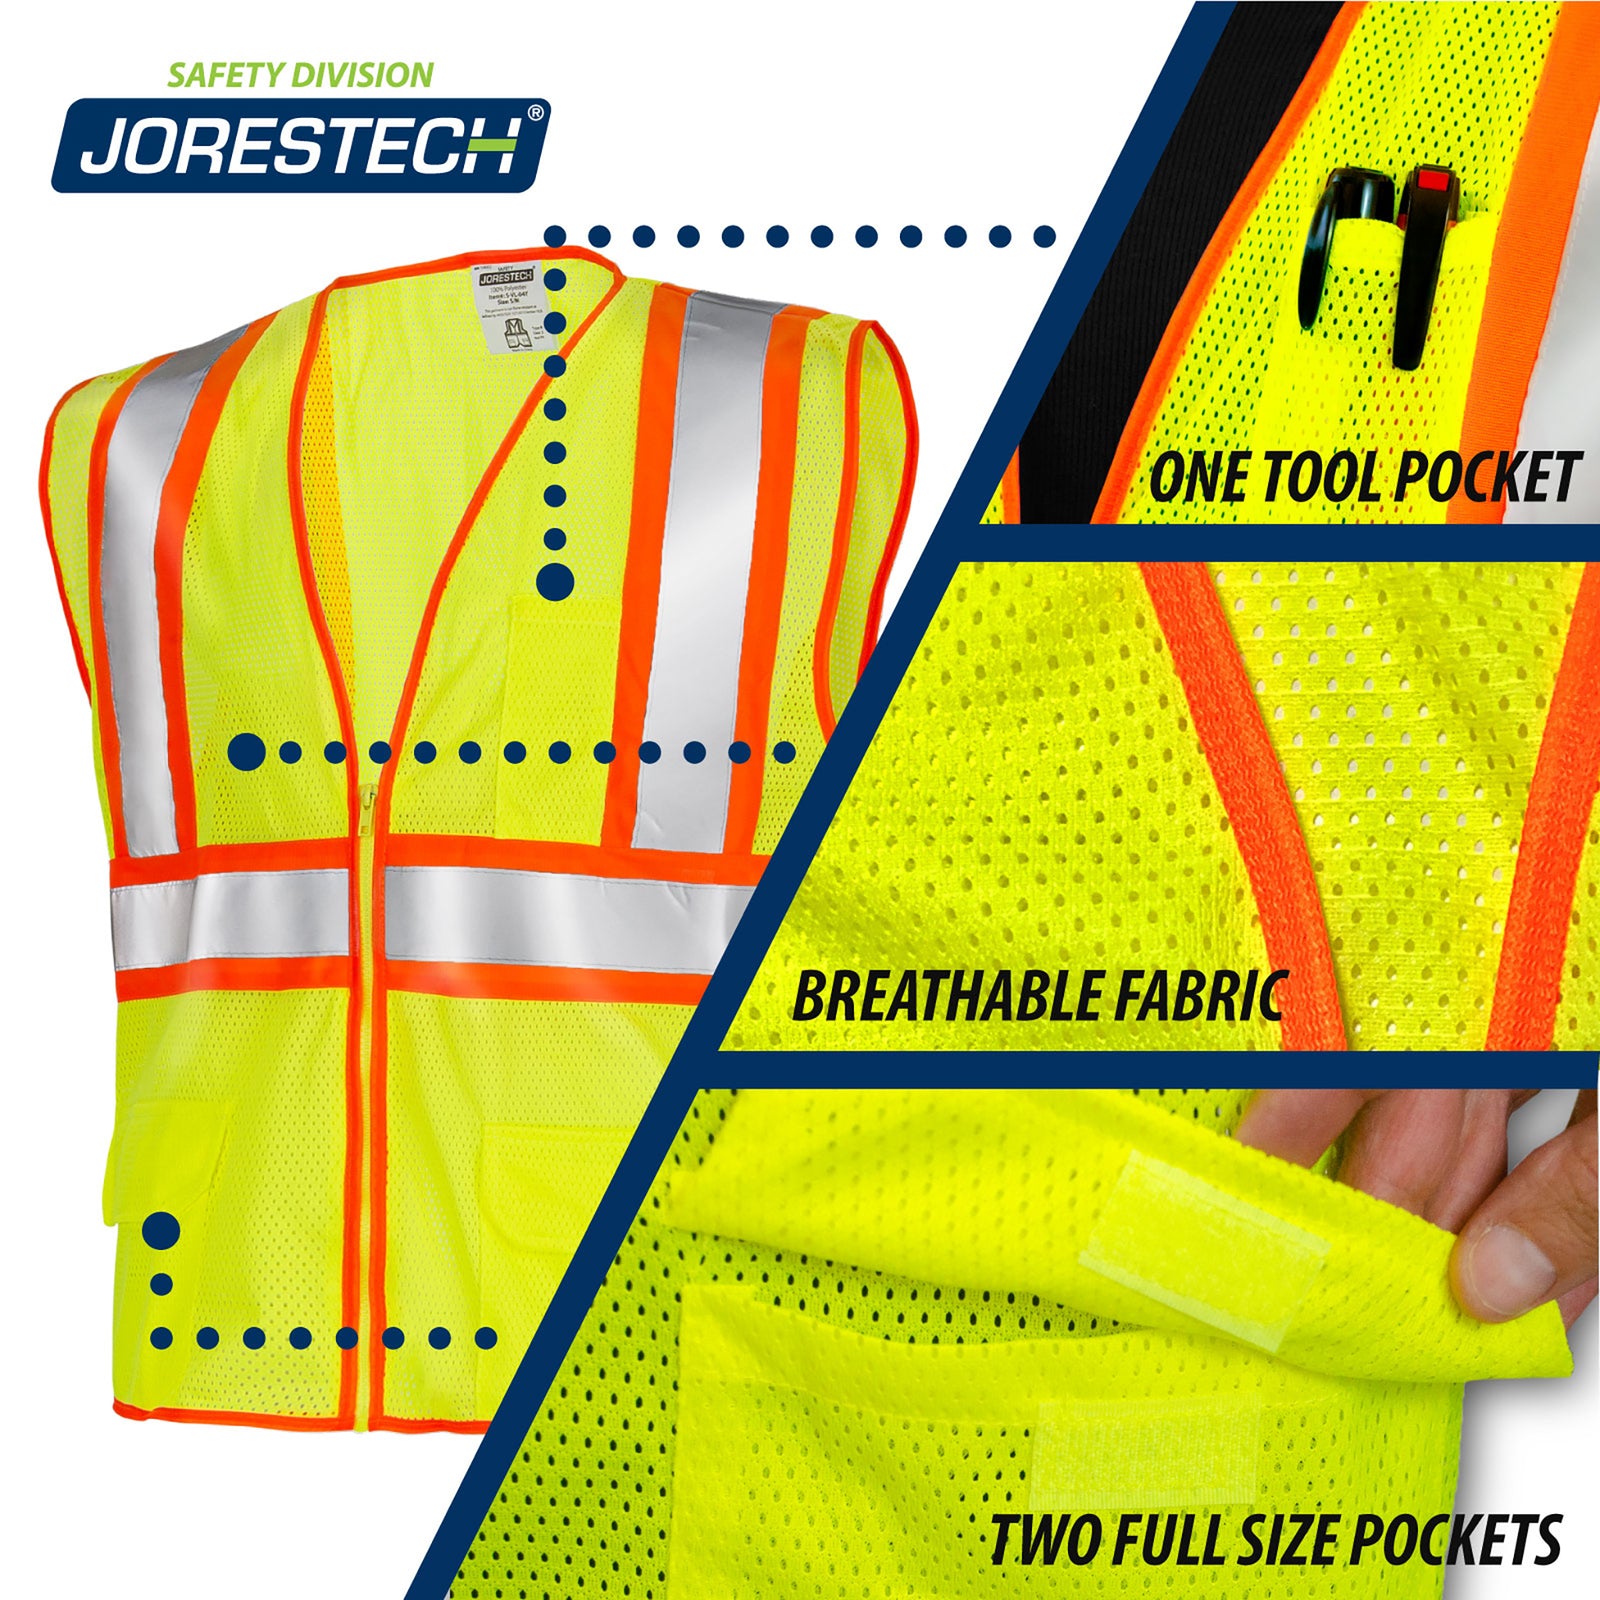 Features the lime safety vest with 3 call outs one tool pocket, breathable fabric and two full size pockets.